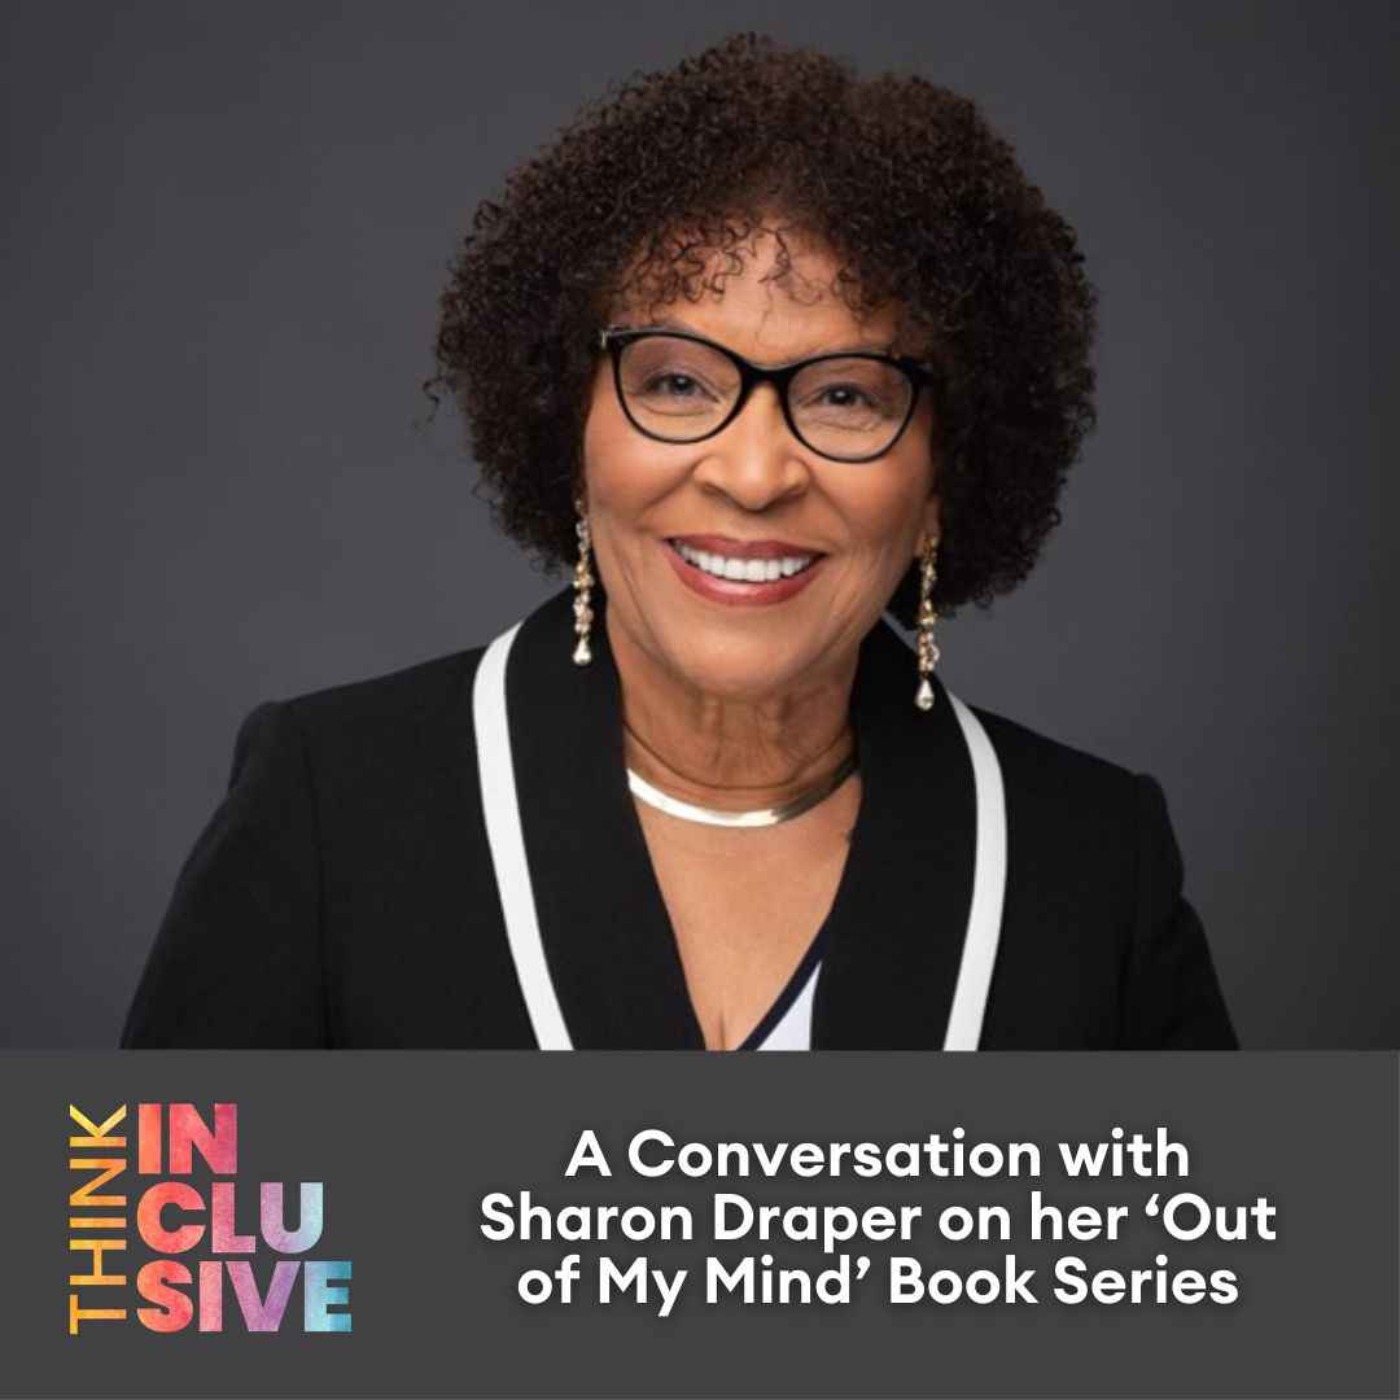 A Conversation with Sharon Draper on her ’Out of My Mind’ Book Series